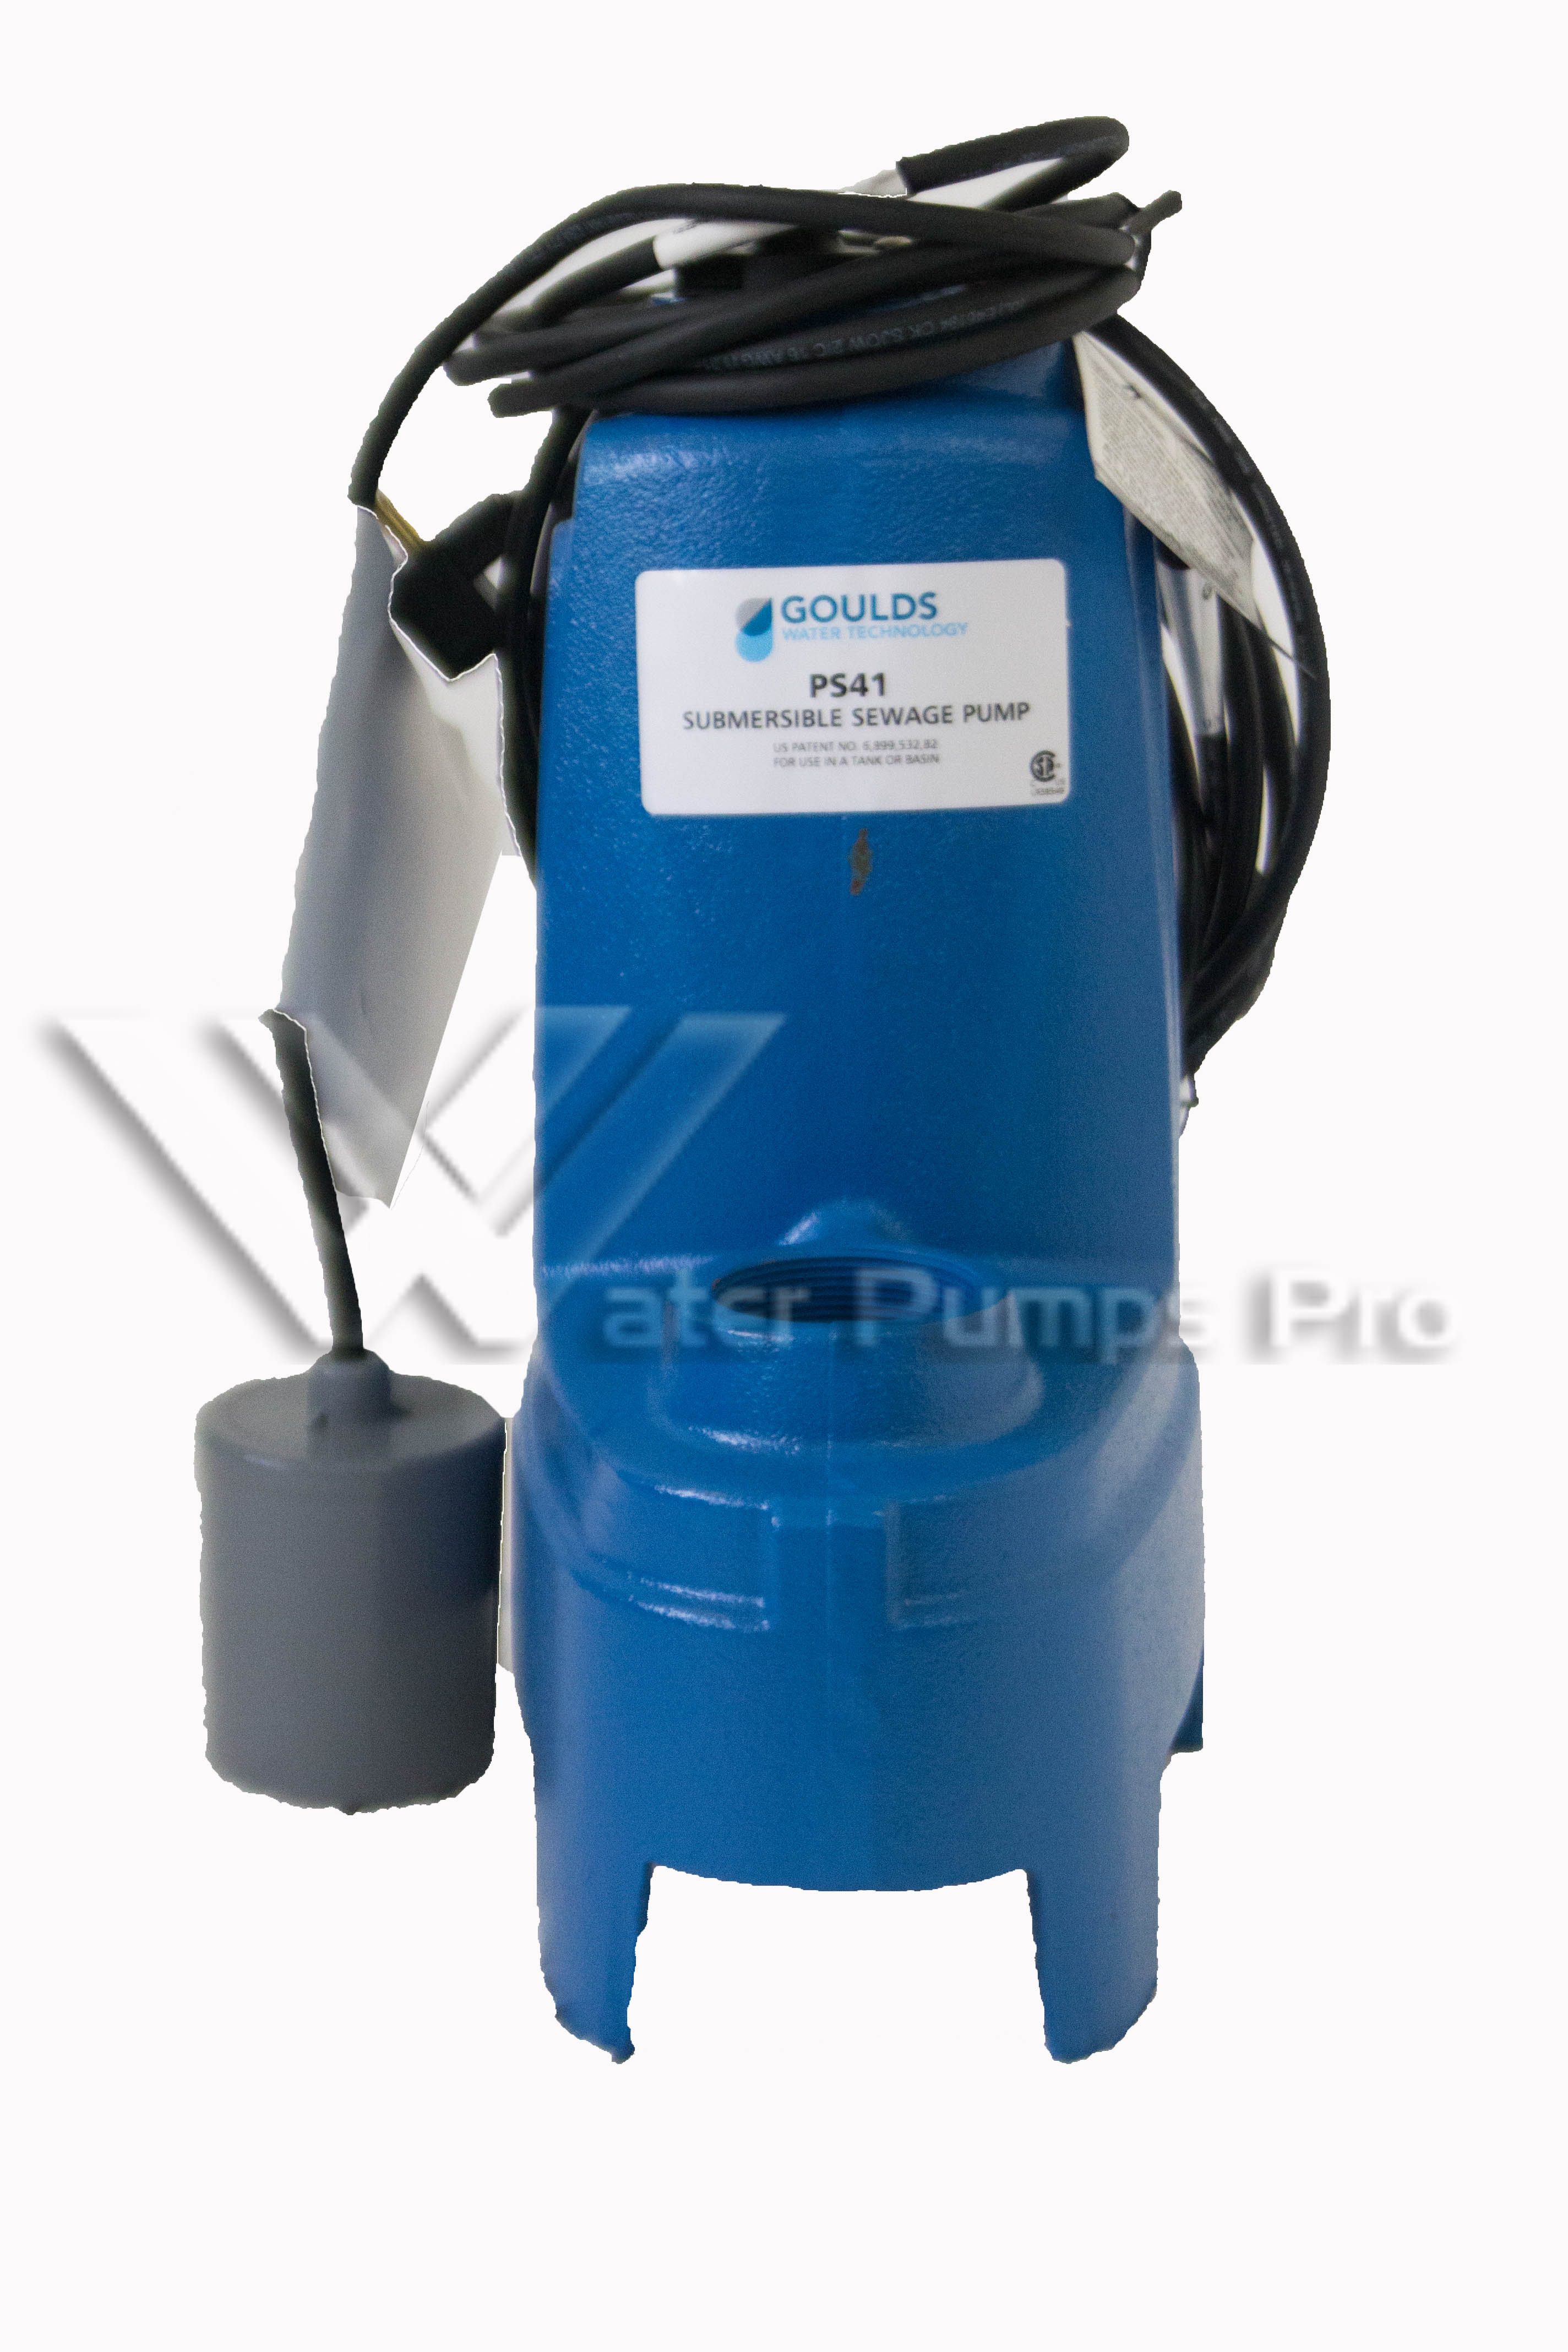 Goulds PS51P1F Submersible Sewage Pump 1/2HP 115V